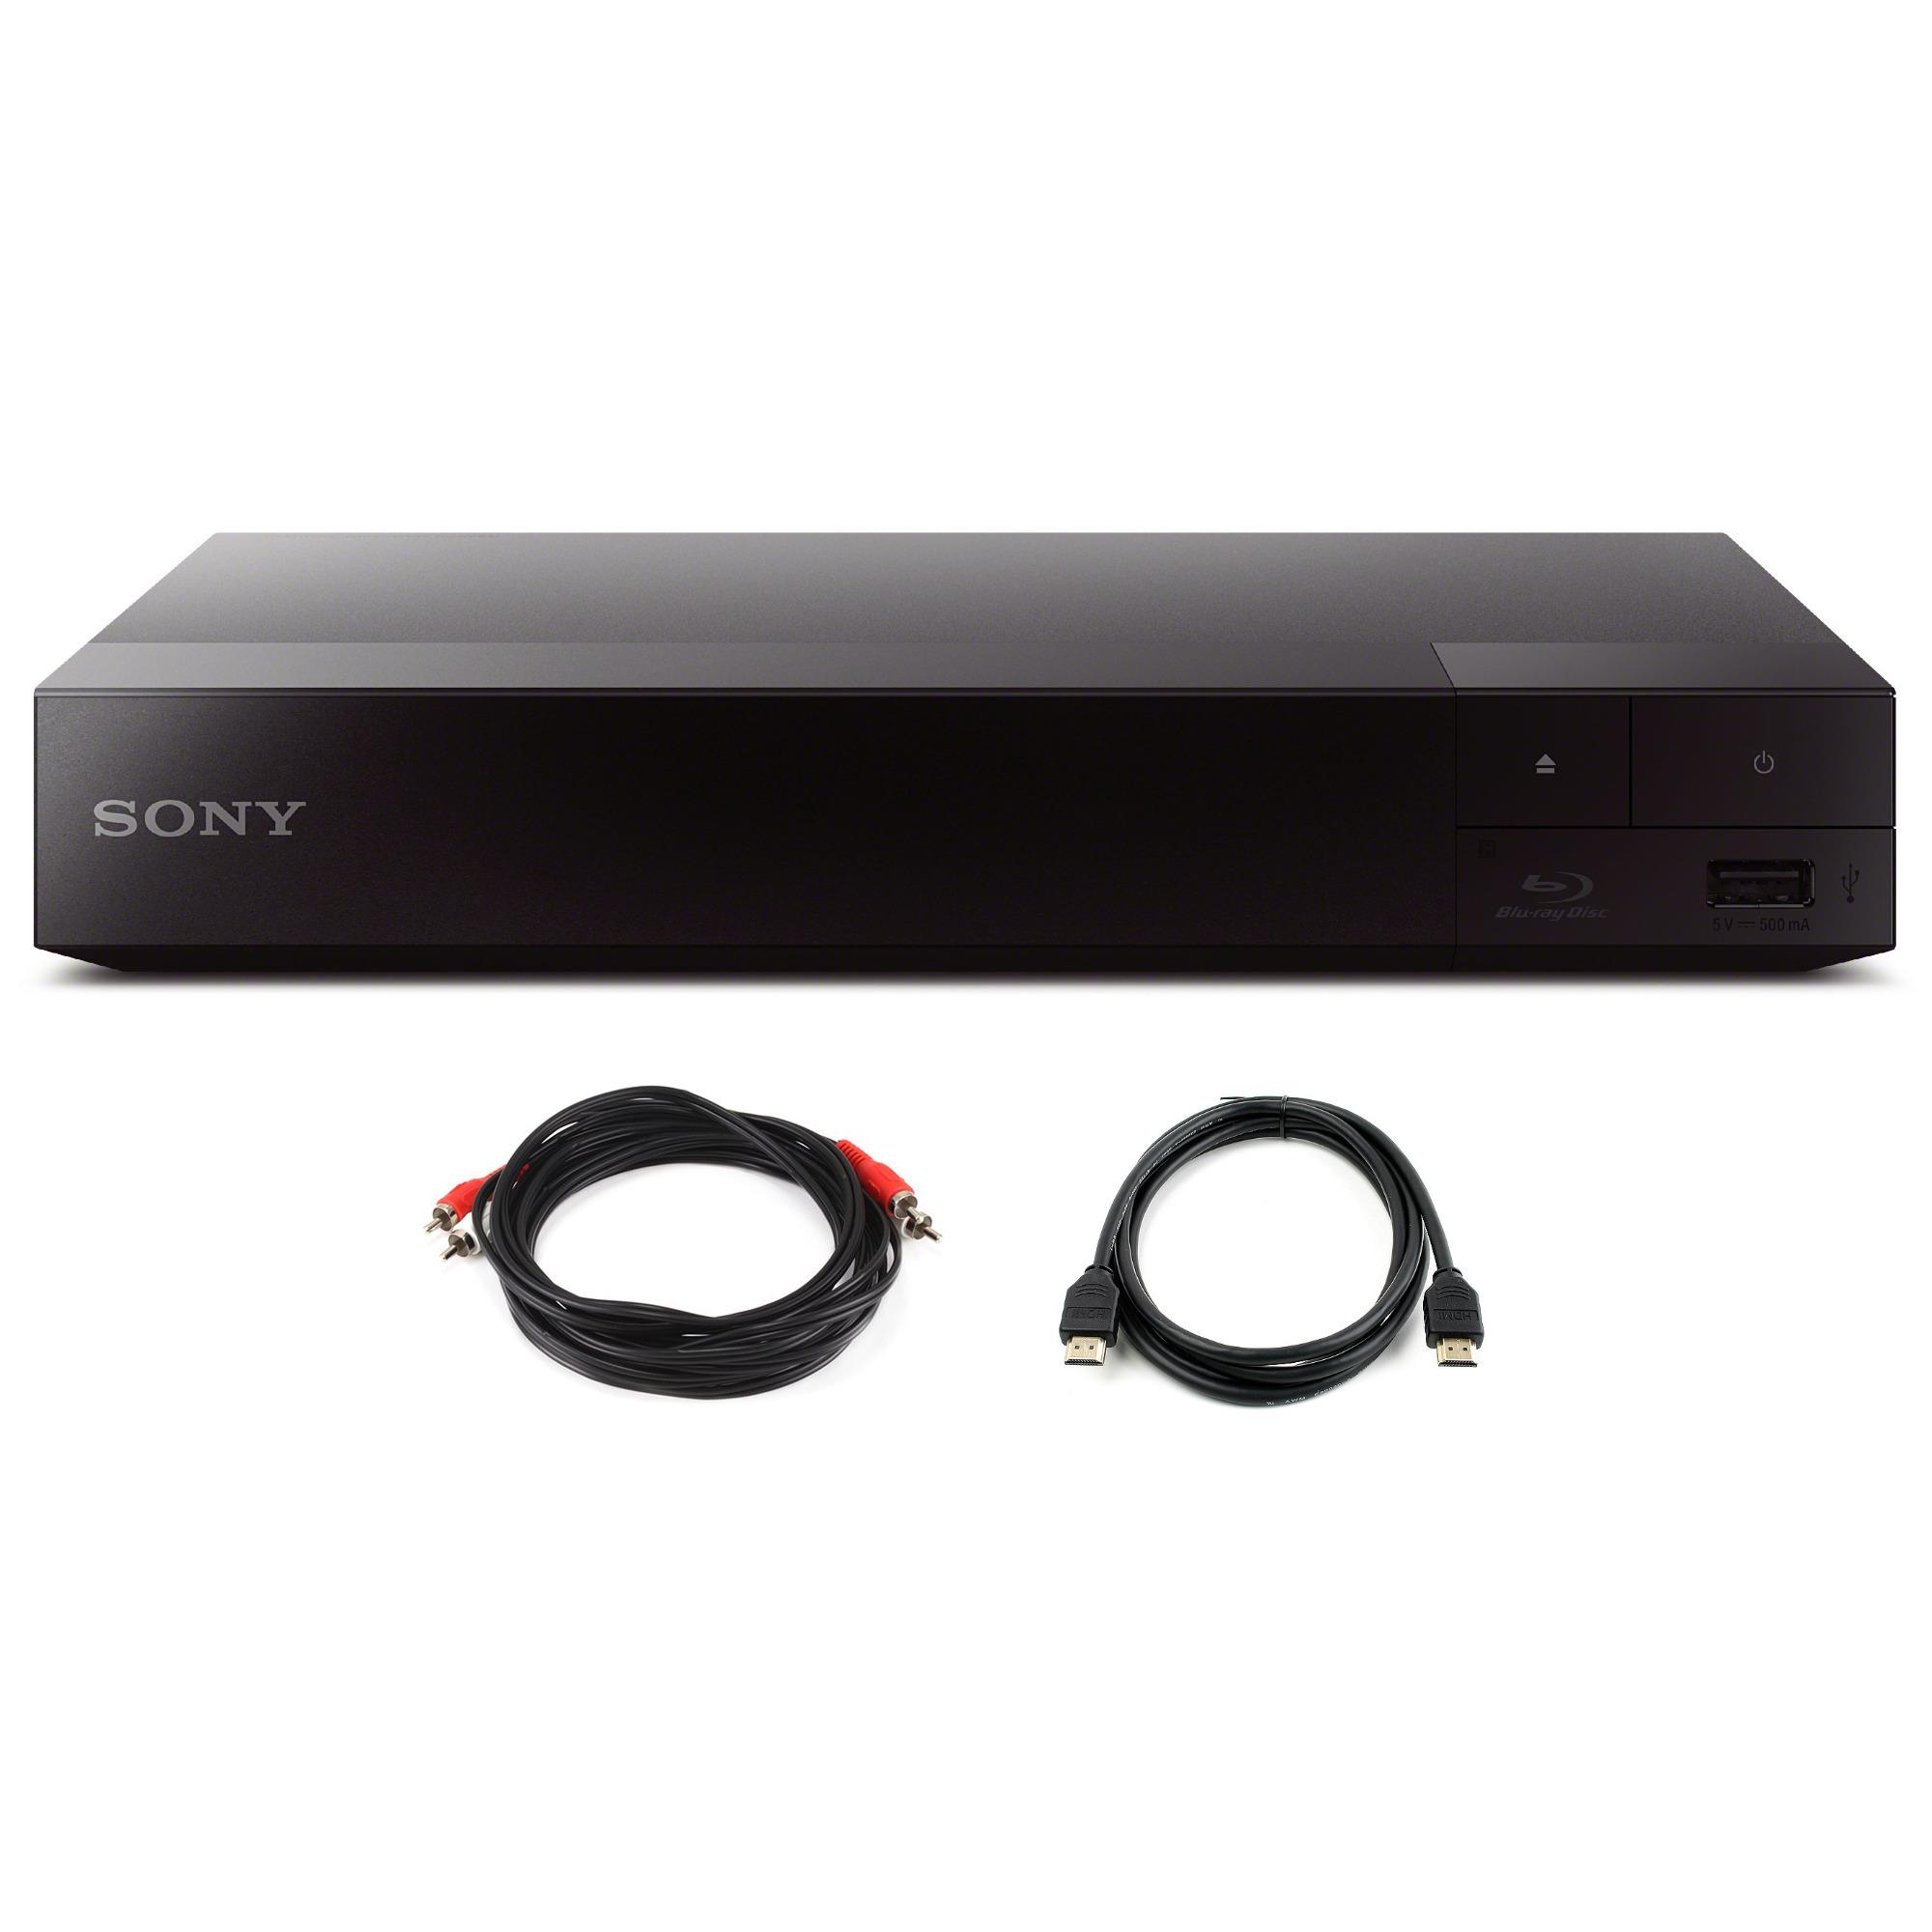 Sony BDPS3700 Streaming Blu-Ray Player with WiFi (2016) plus Two Cable Bundle - image 1 of 6